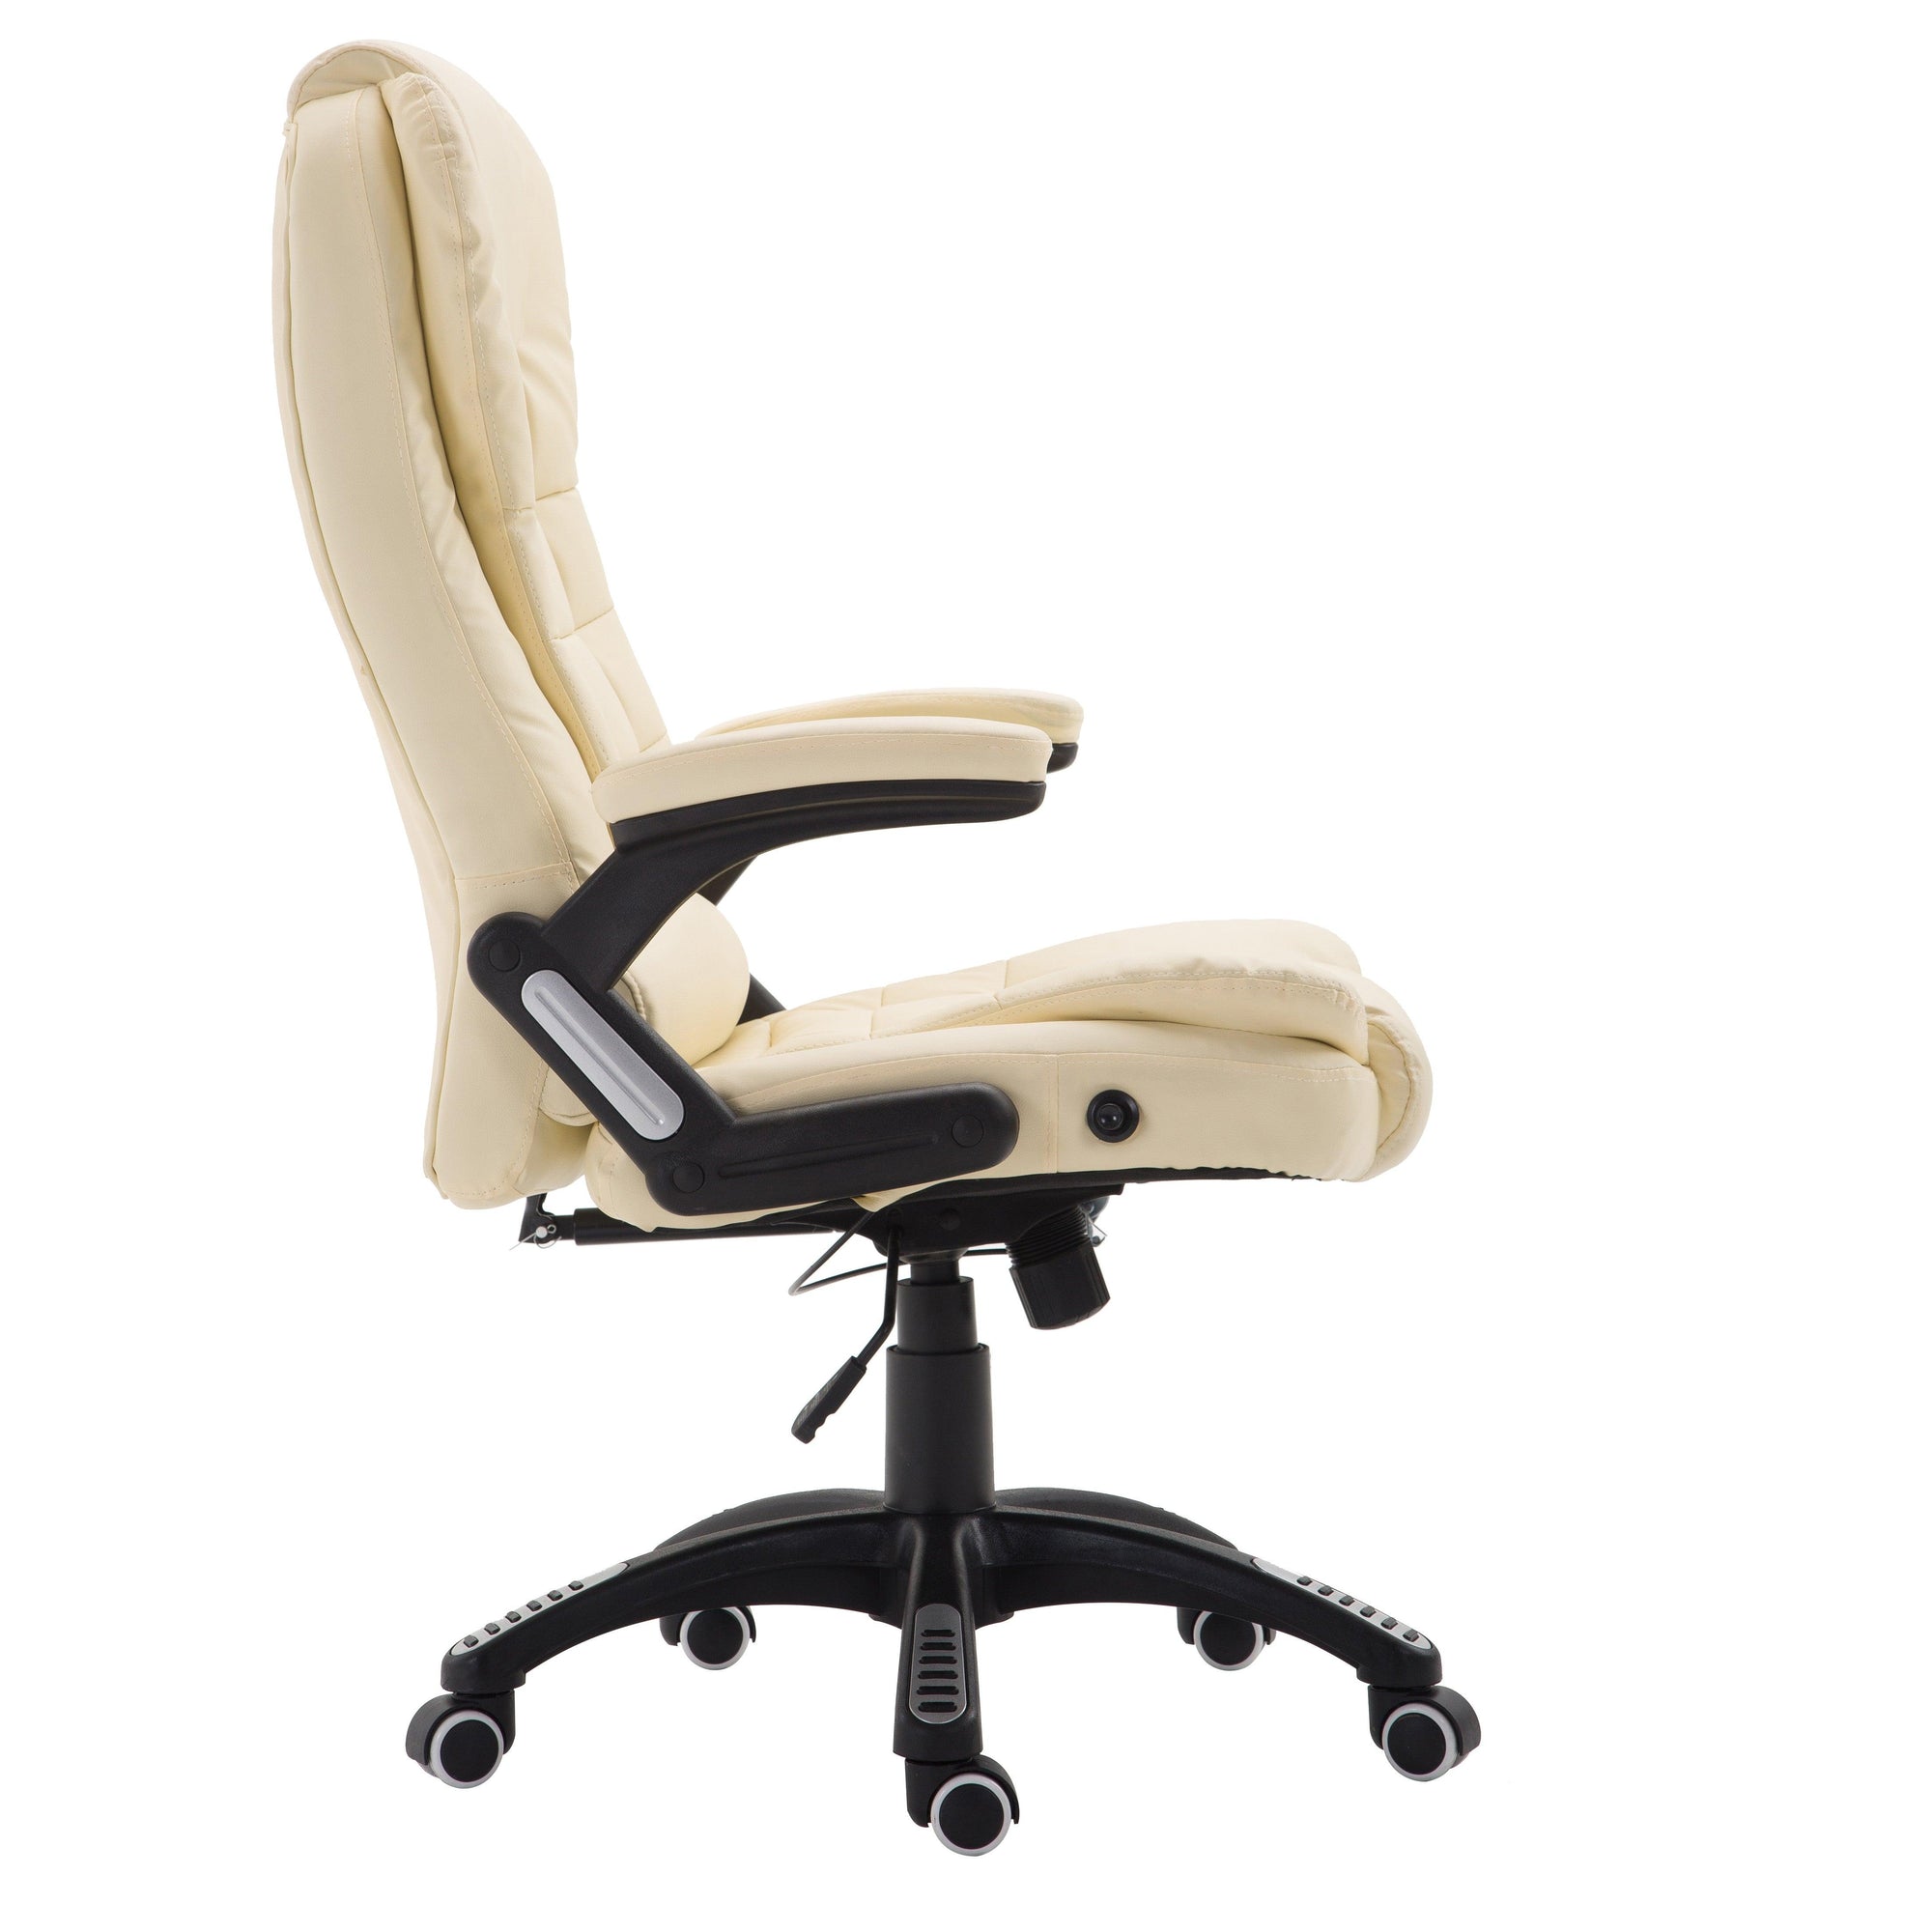 Executive Recline High Back Extra Padded Office Chair, MO17 Cream